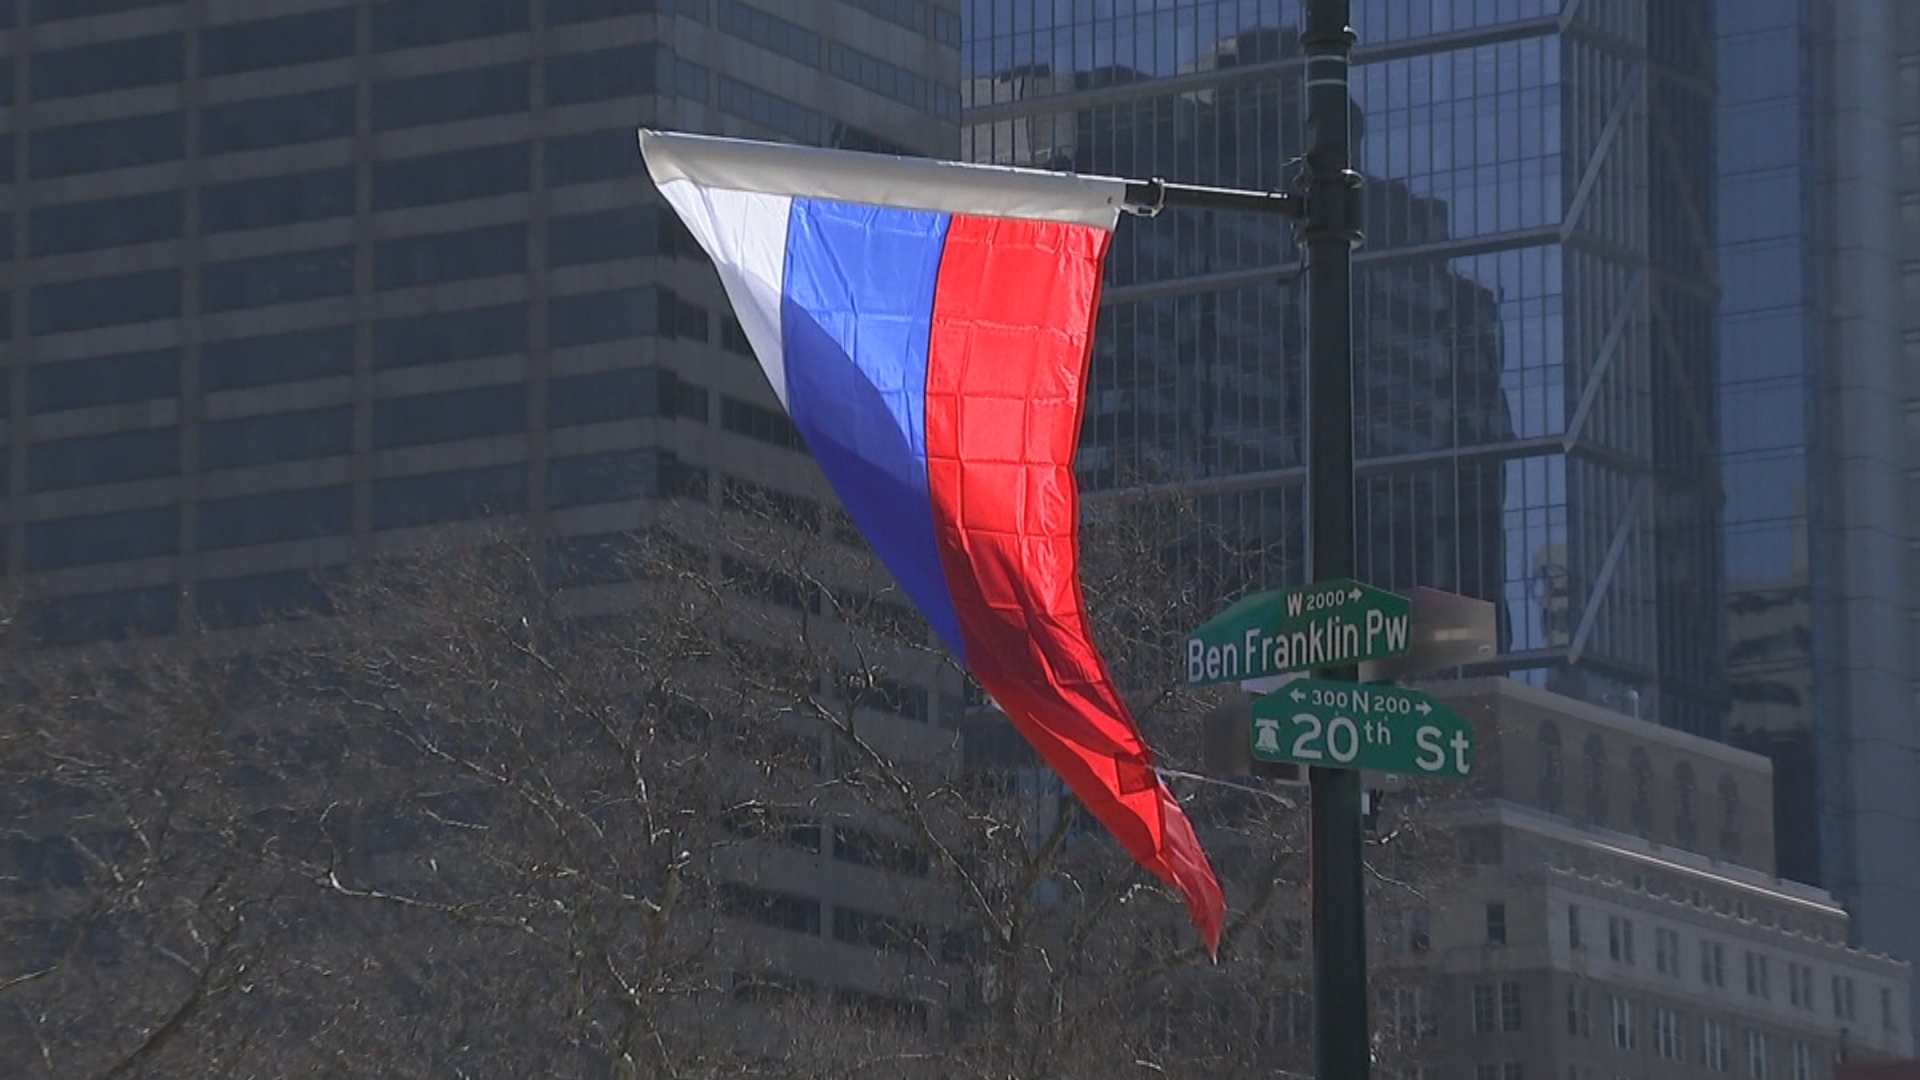 Should Russian's Flag Be Removed From Peace Plaza in Rockford, IL